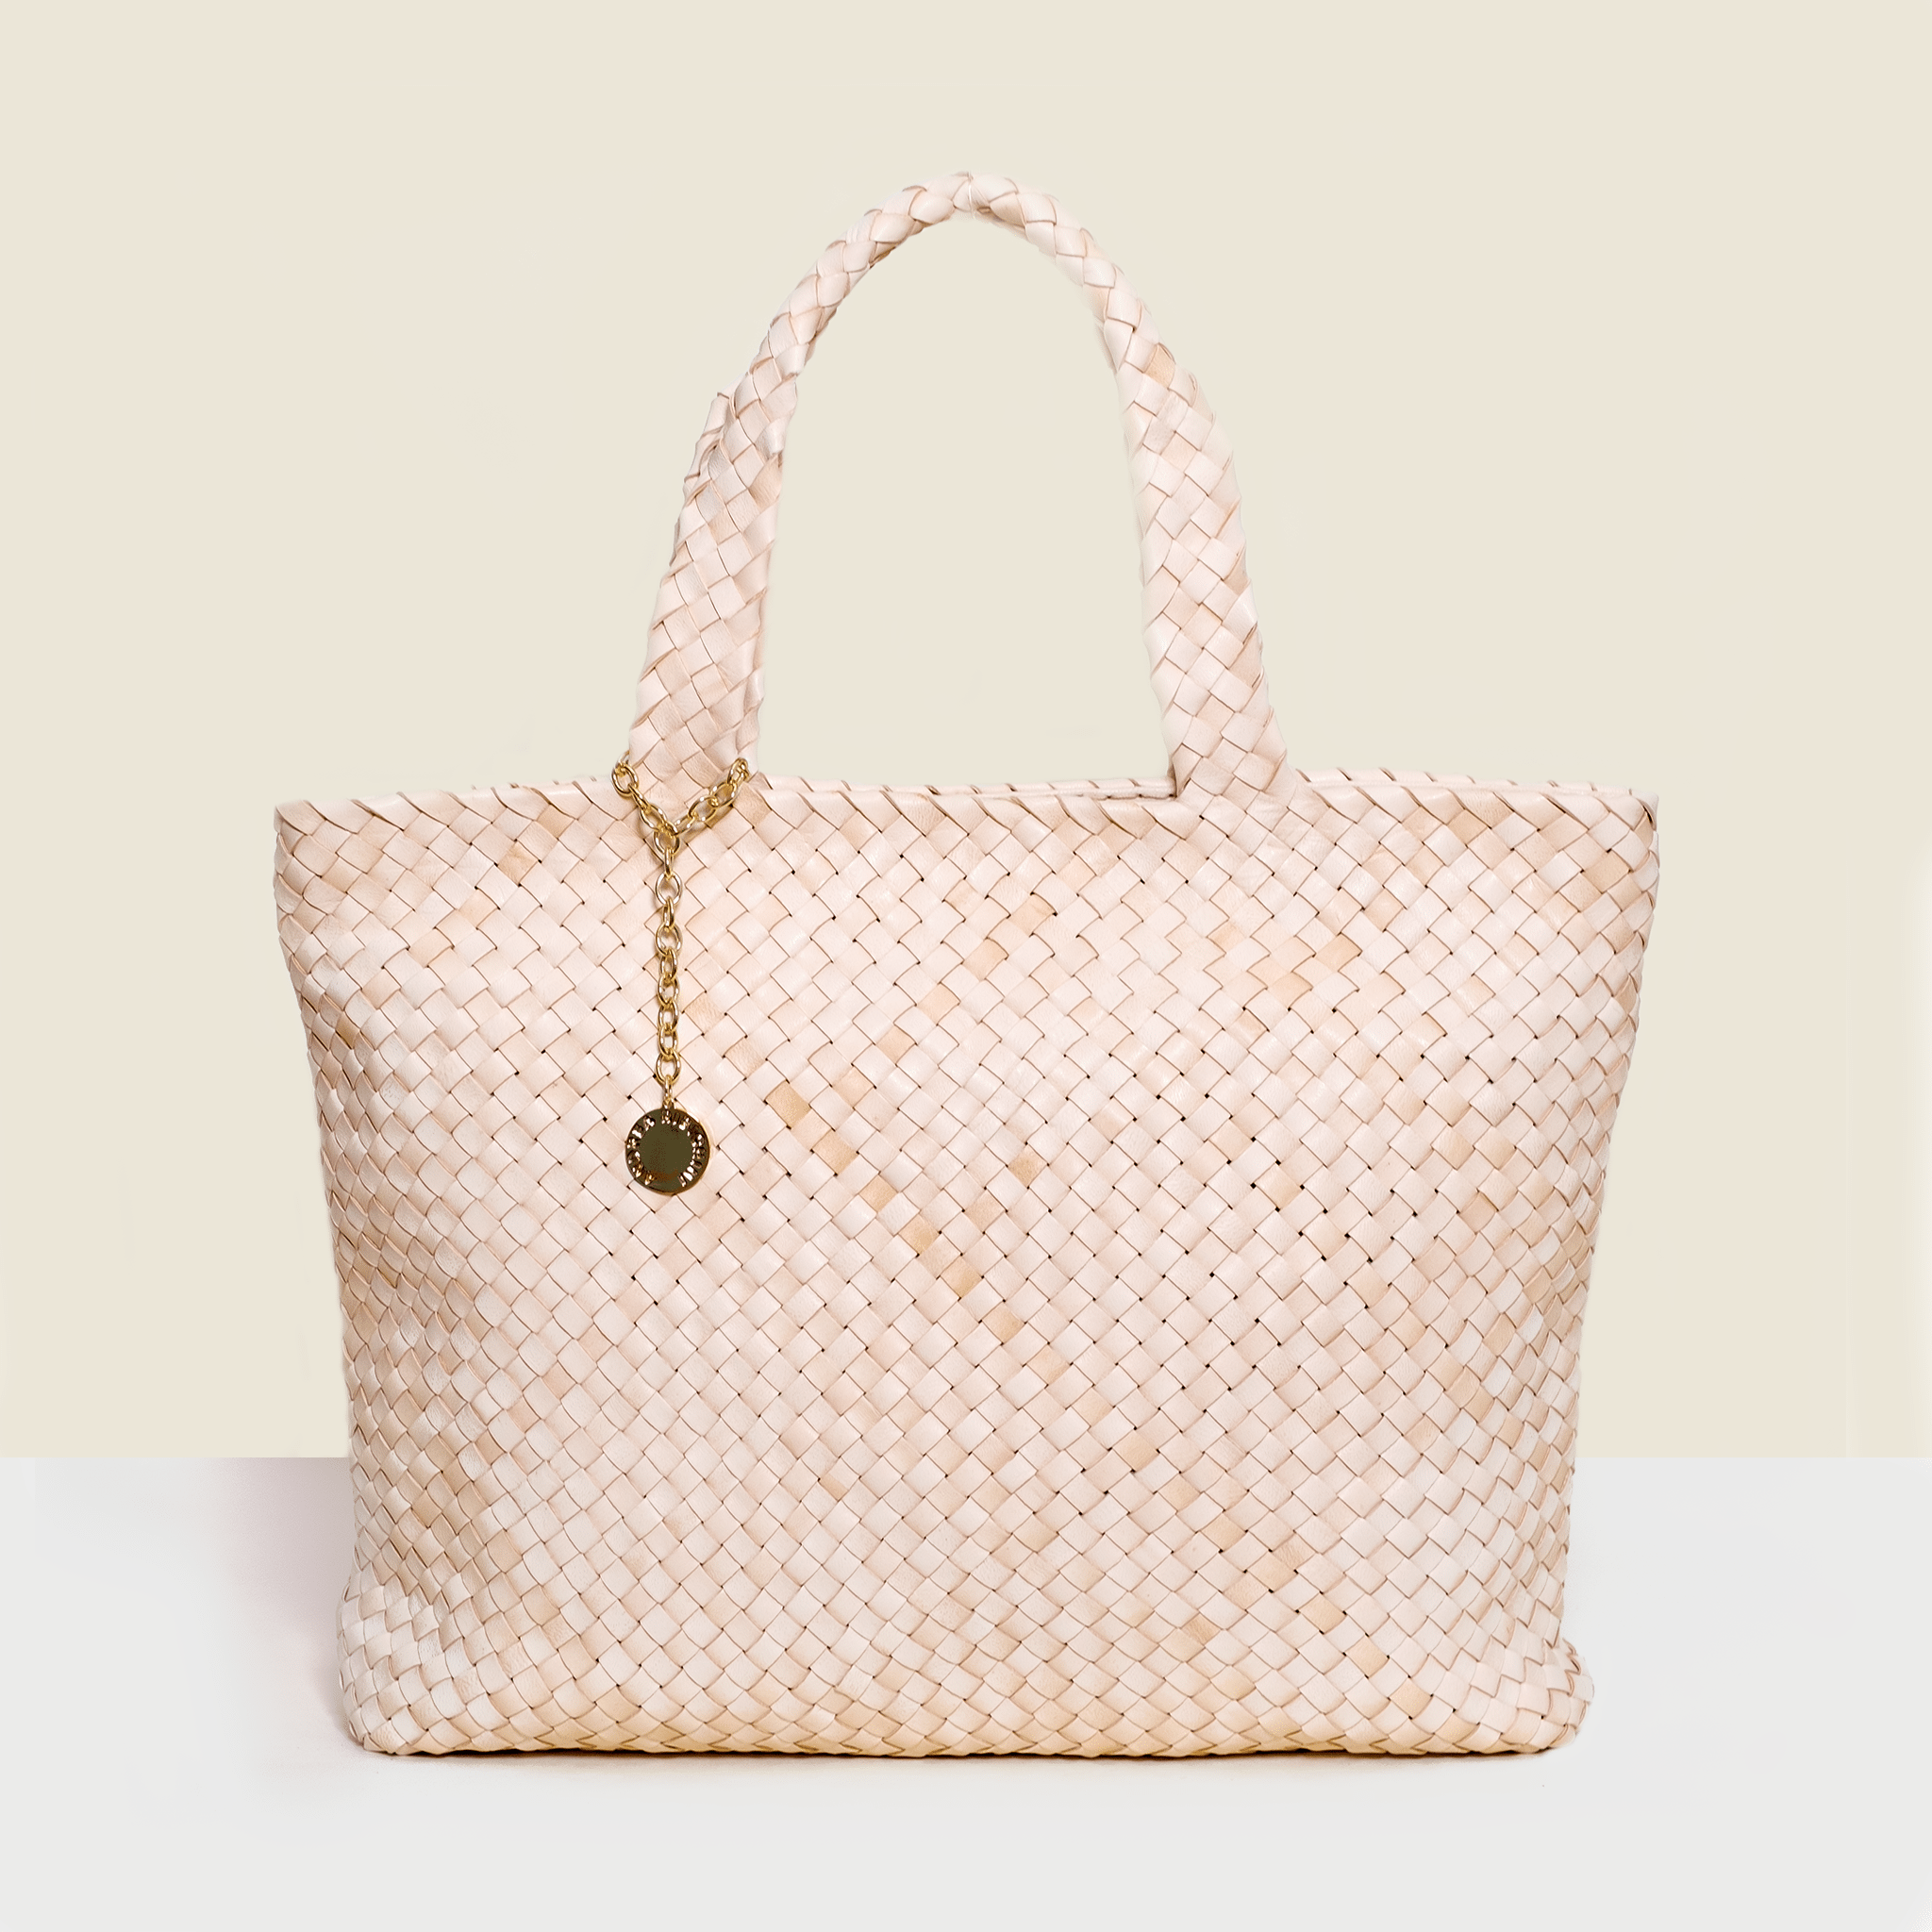 Cream shopper style woven leather luxury bag. Handmade in Italy